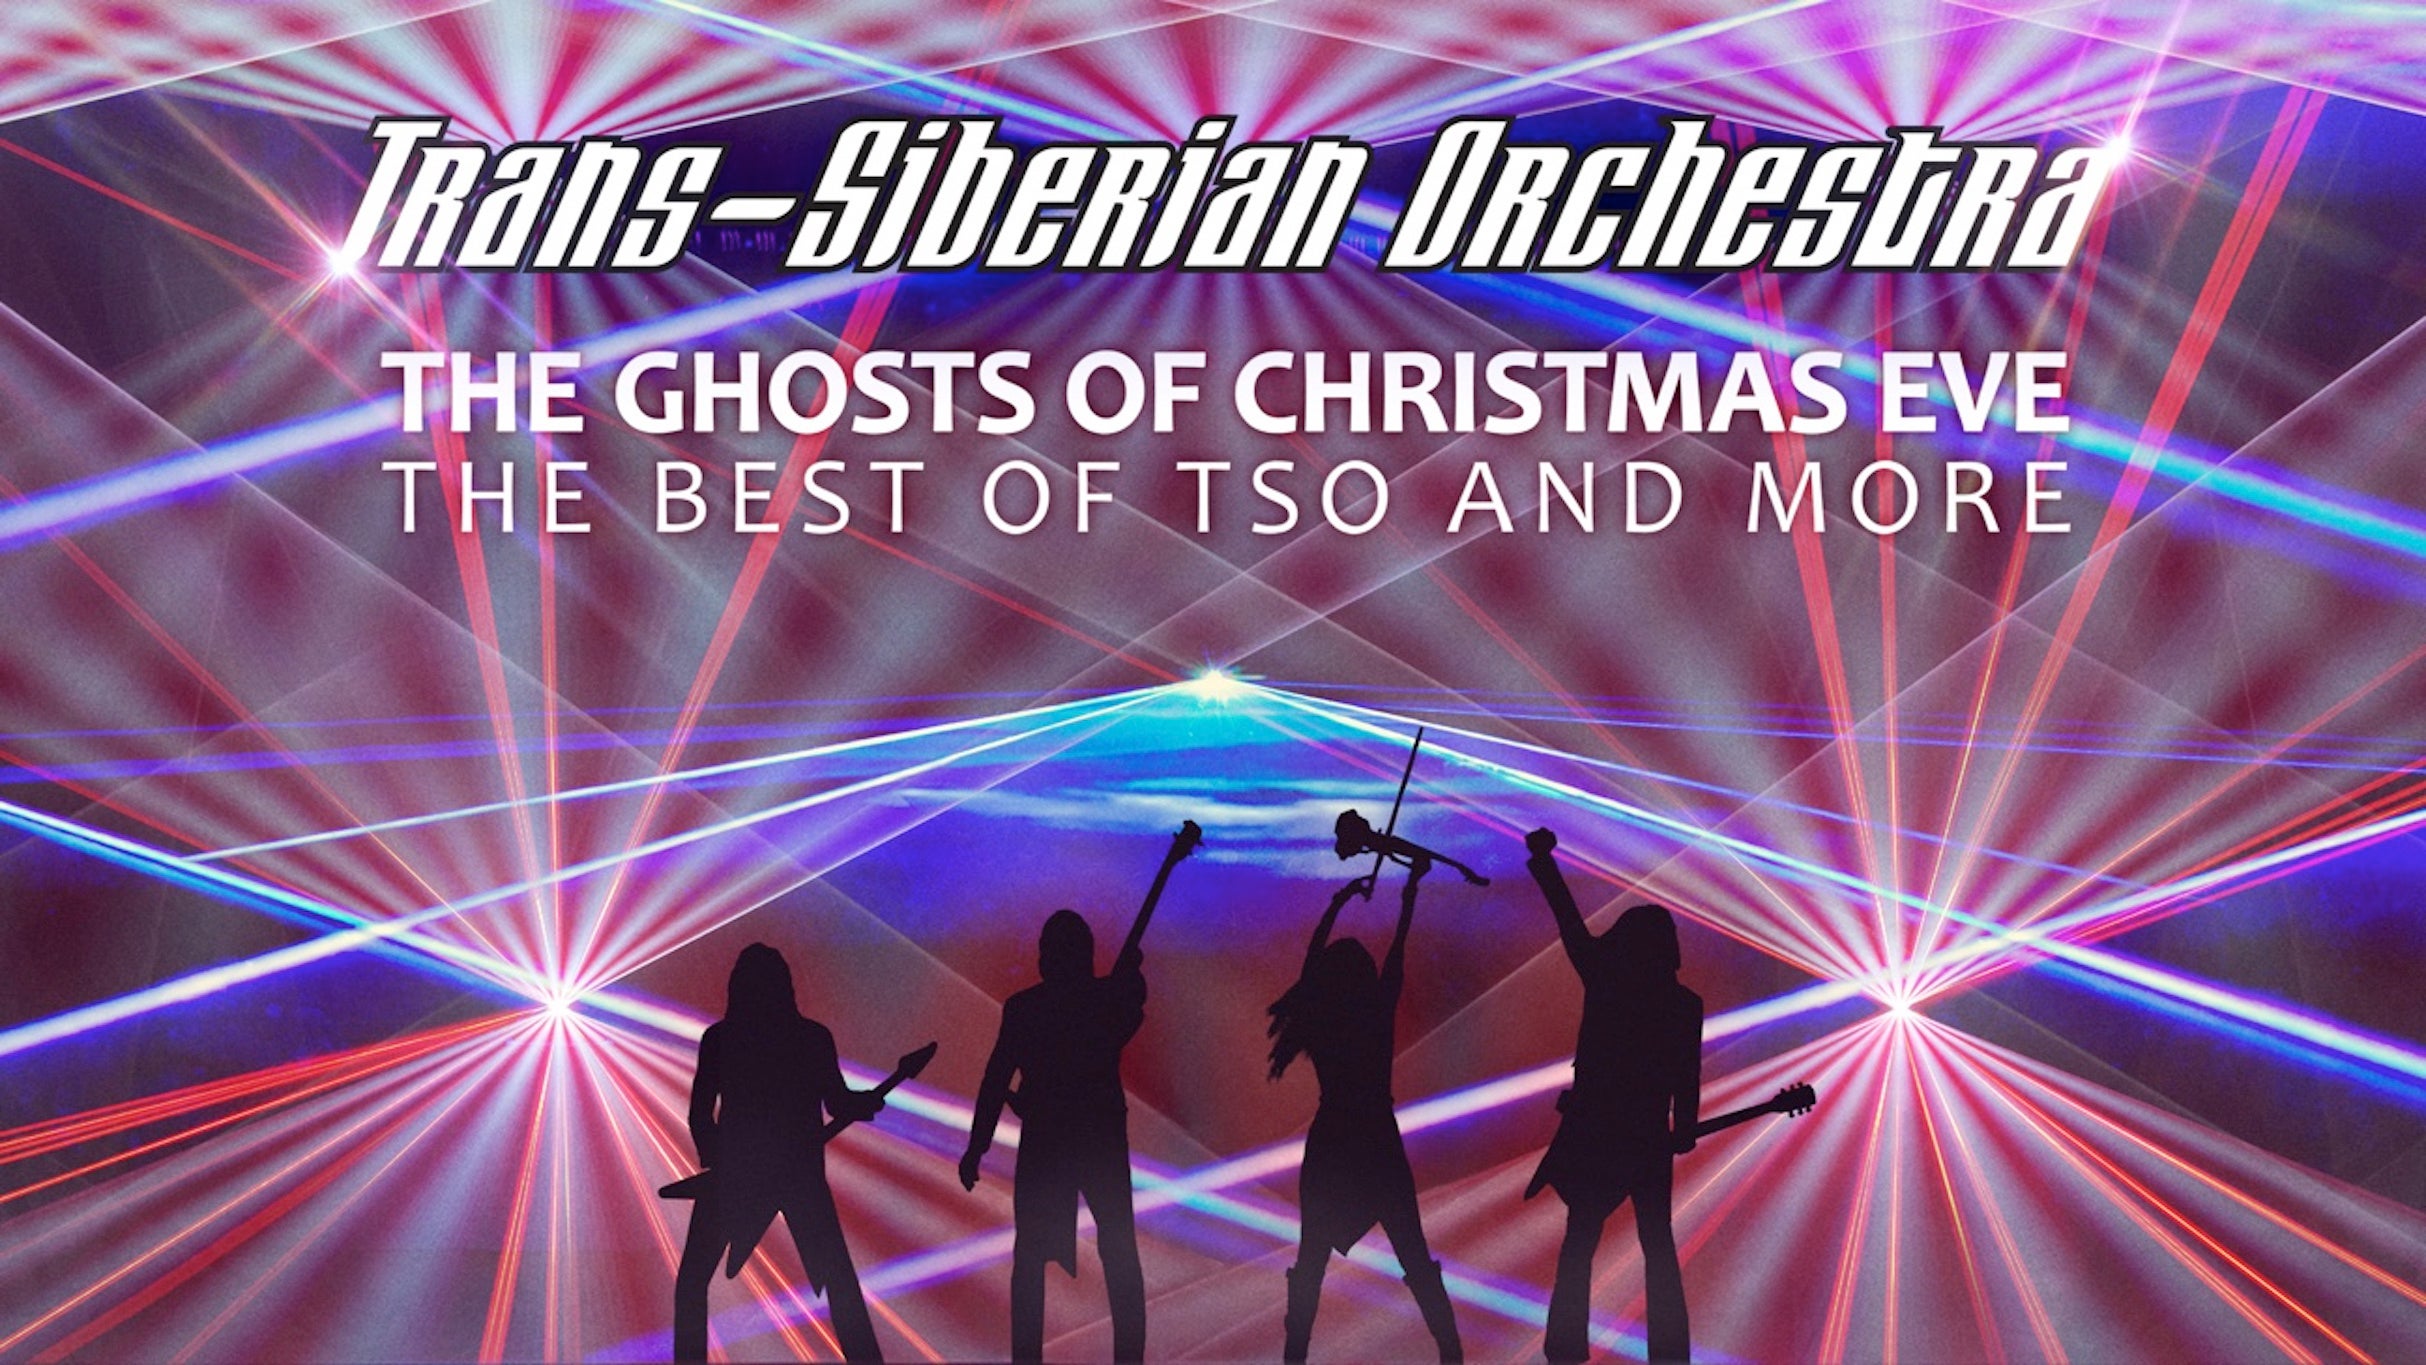 Trans-Siberian Orchestra - The Ghosts Of Christmas Eve free pre-sale code for show tickets in Detroit, MI (Little Caesars Arena)